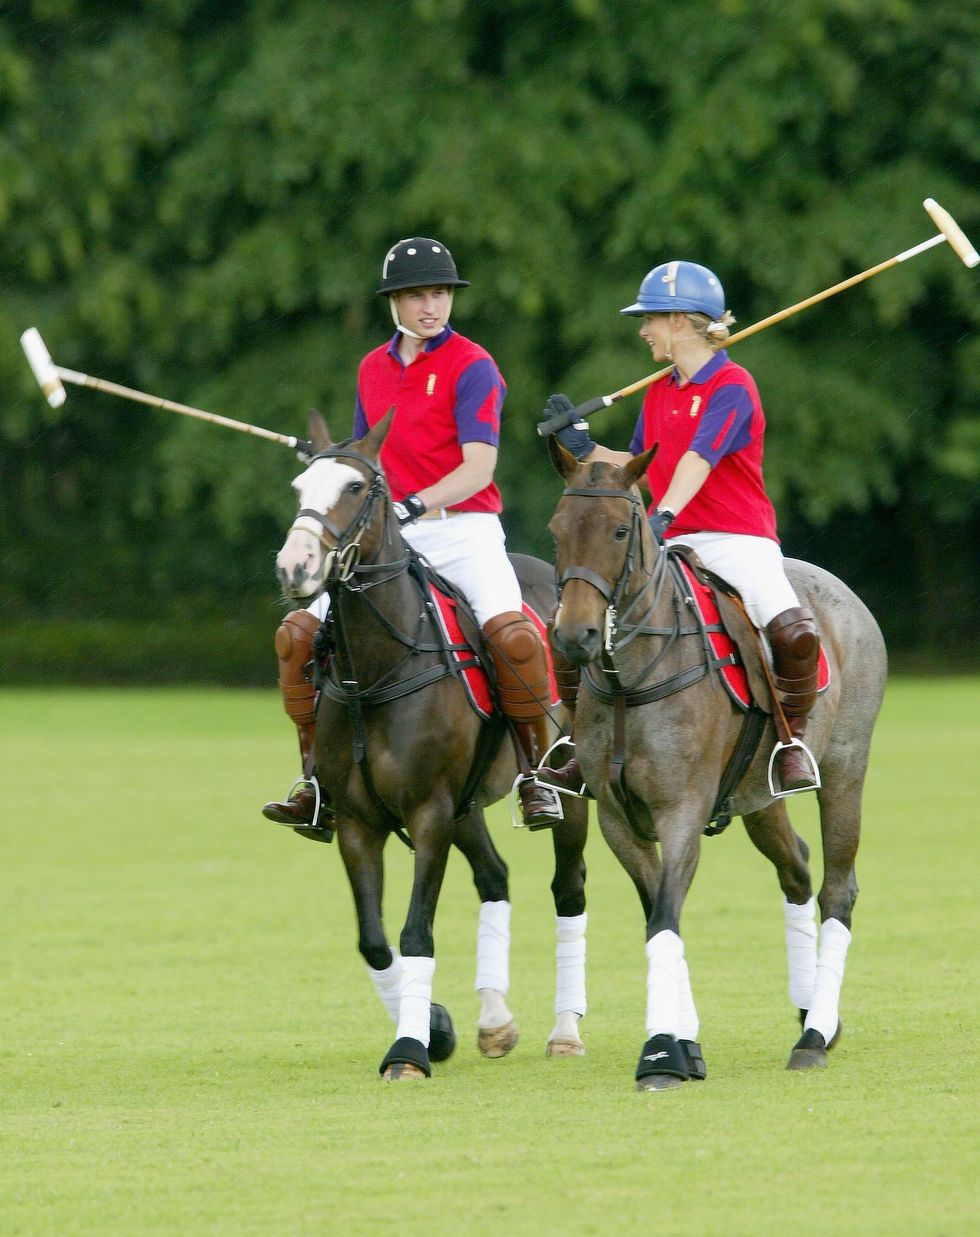 polo army v navy rundle cup match